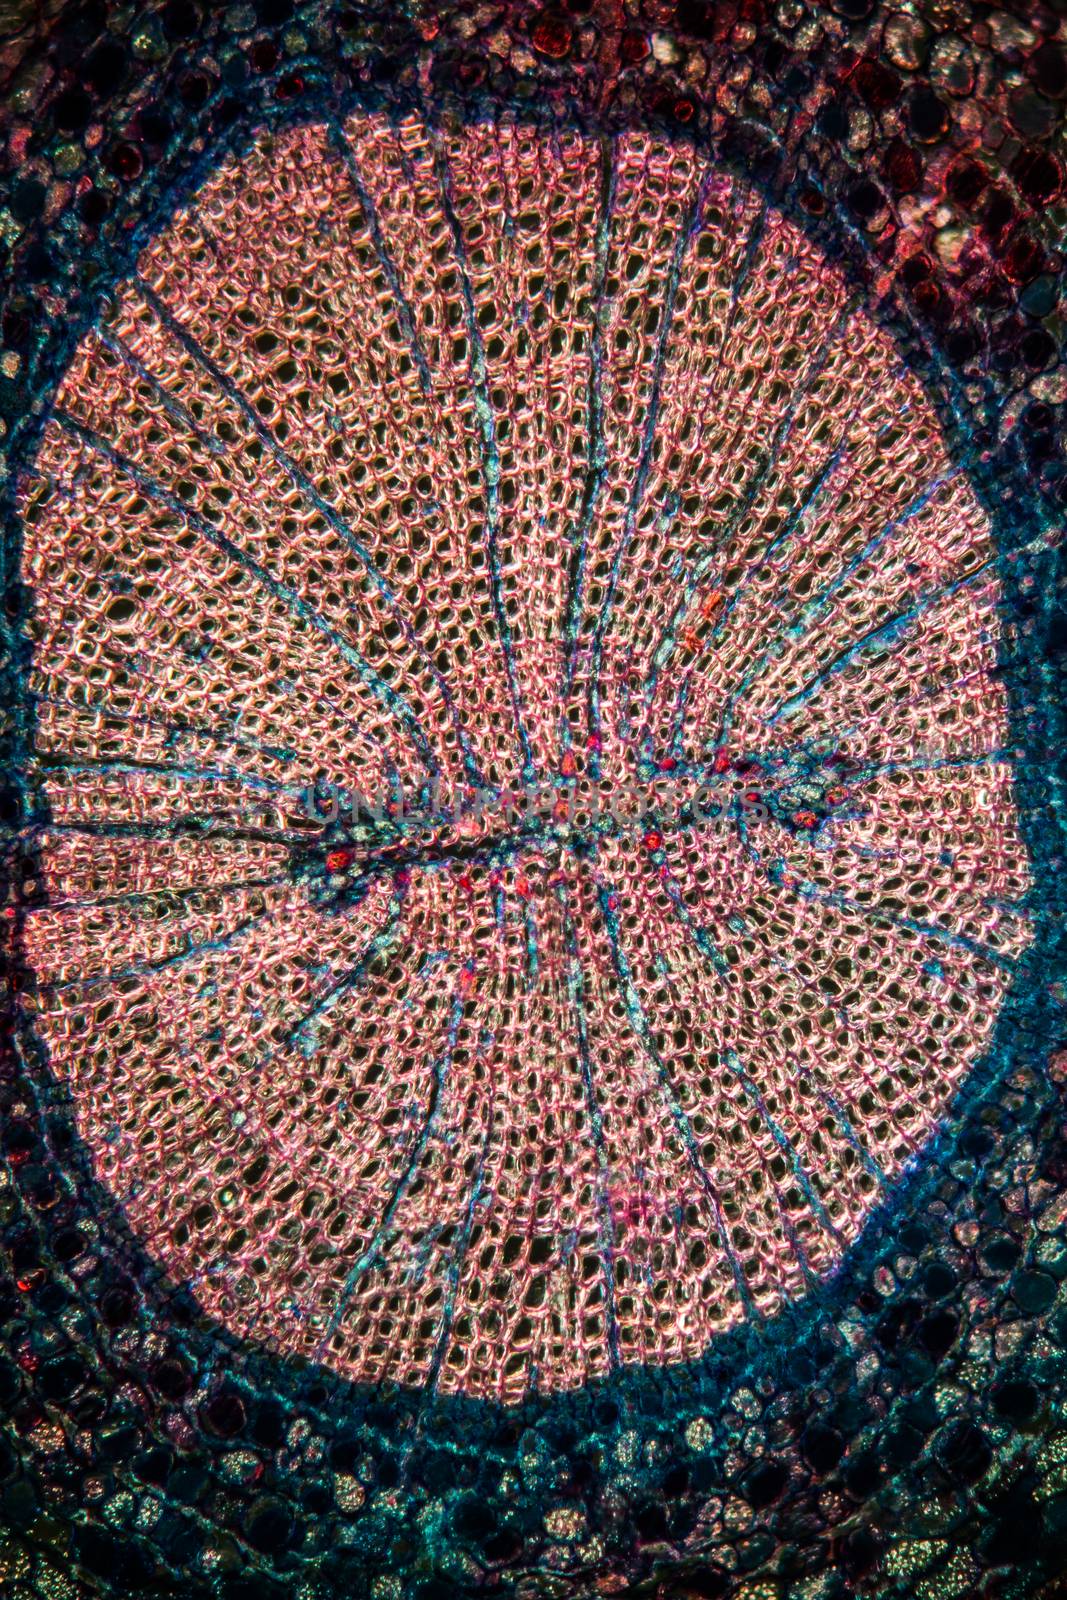 Yew root in cross section 100x by Dr-Lange